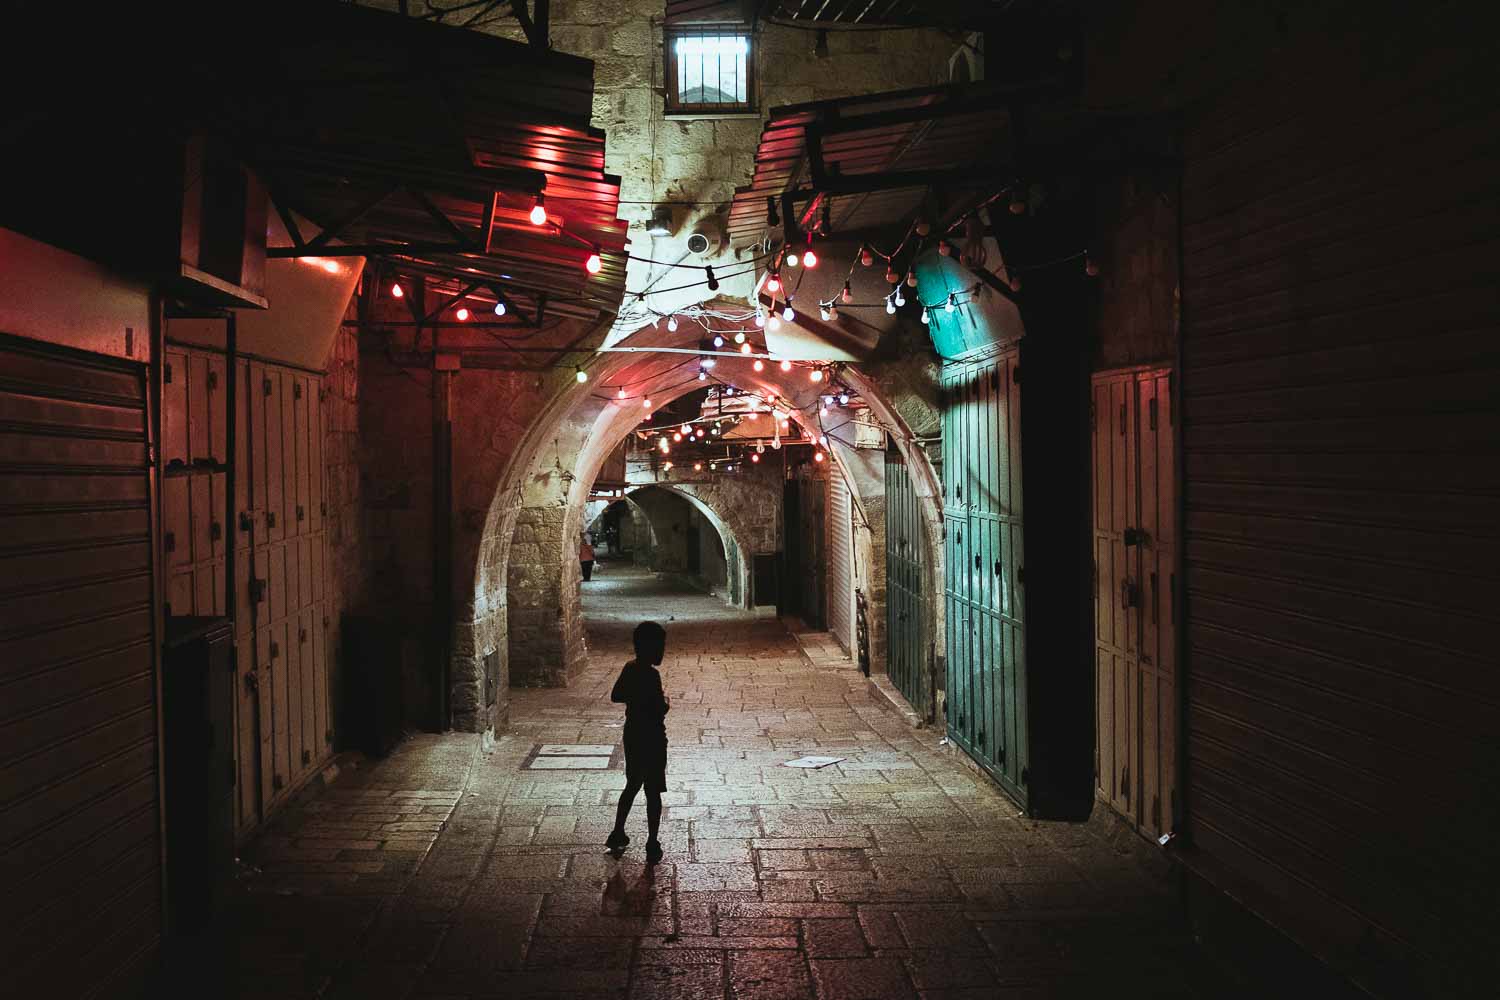 This photo shows the fine art print The Nights of Jerusalem by Philip Reitsperger